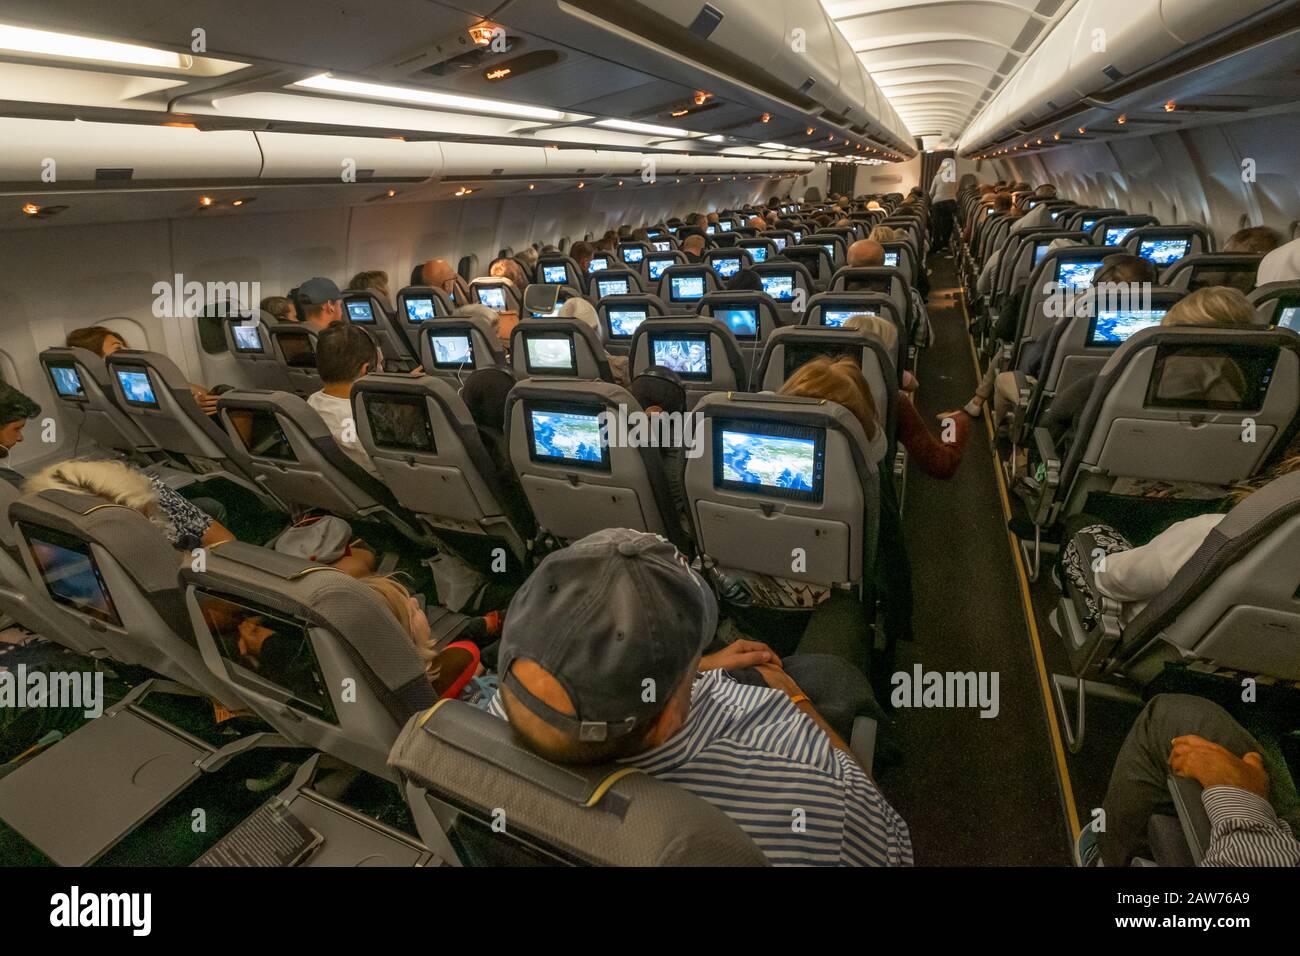 People are entertained with movies during the flight to their resort. Stock Photo